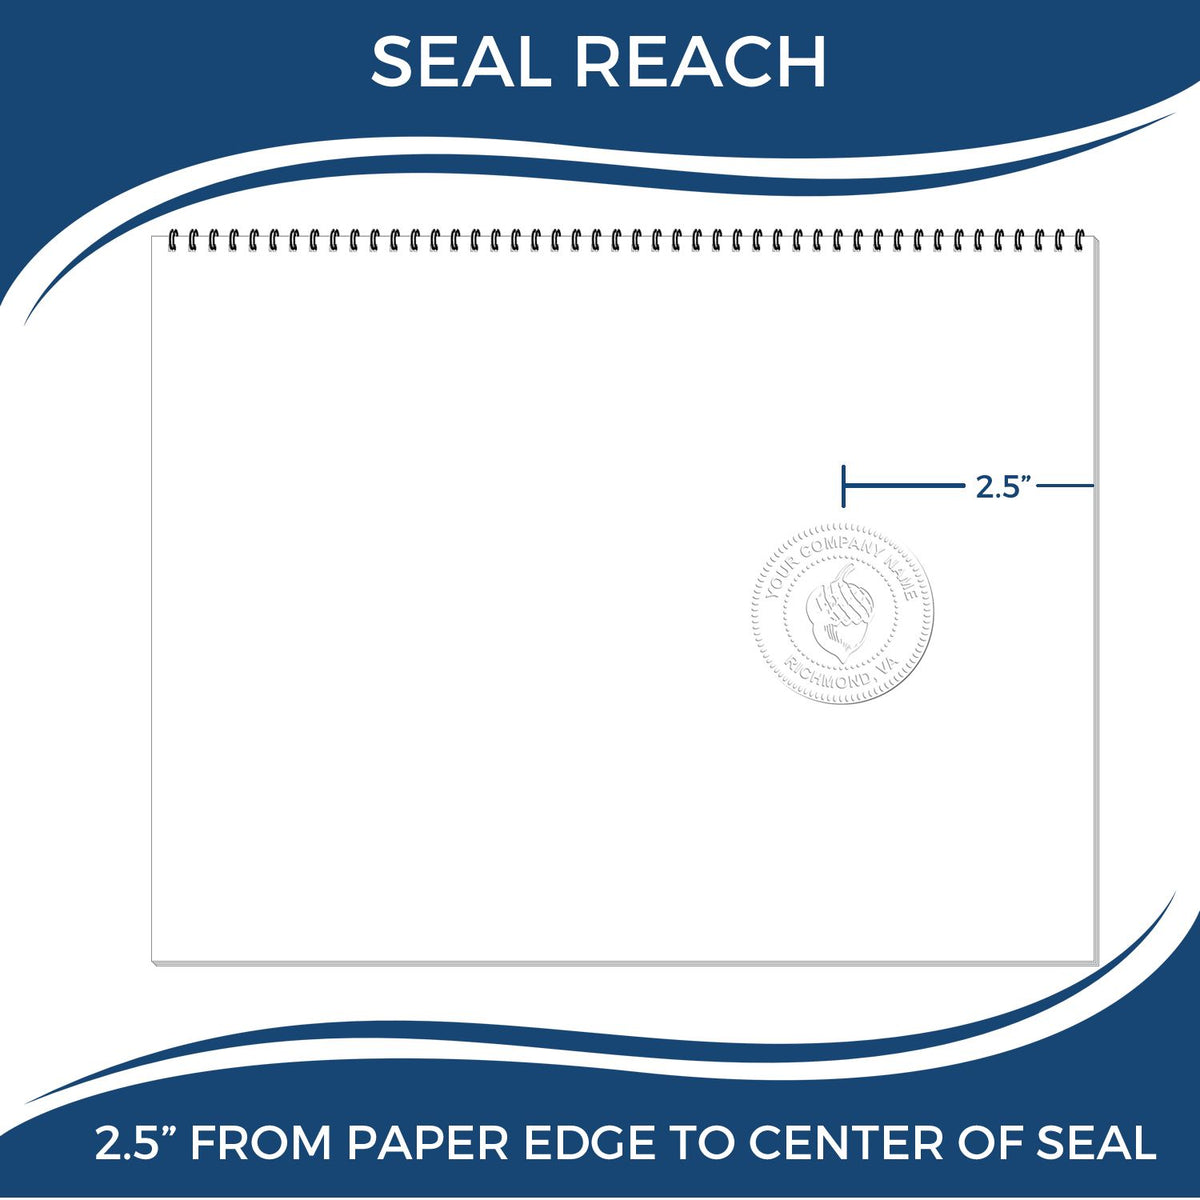 An infographic showing the seal reach which is represented by a ruler and a miniature seal image of the Long Reach Utah Geology Seal